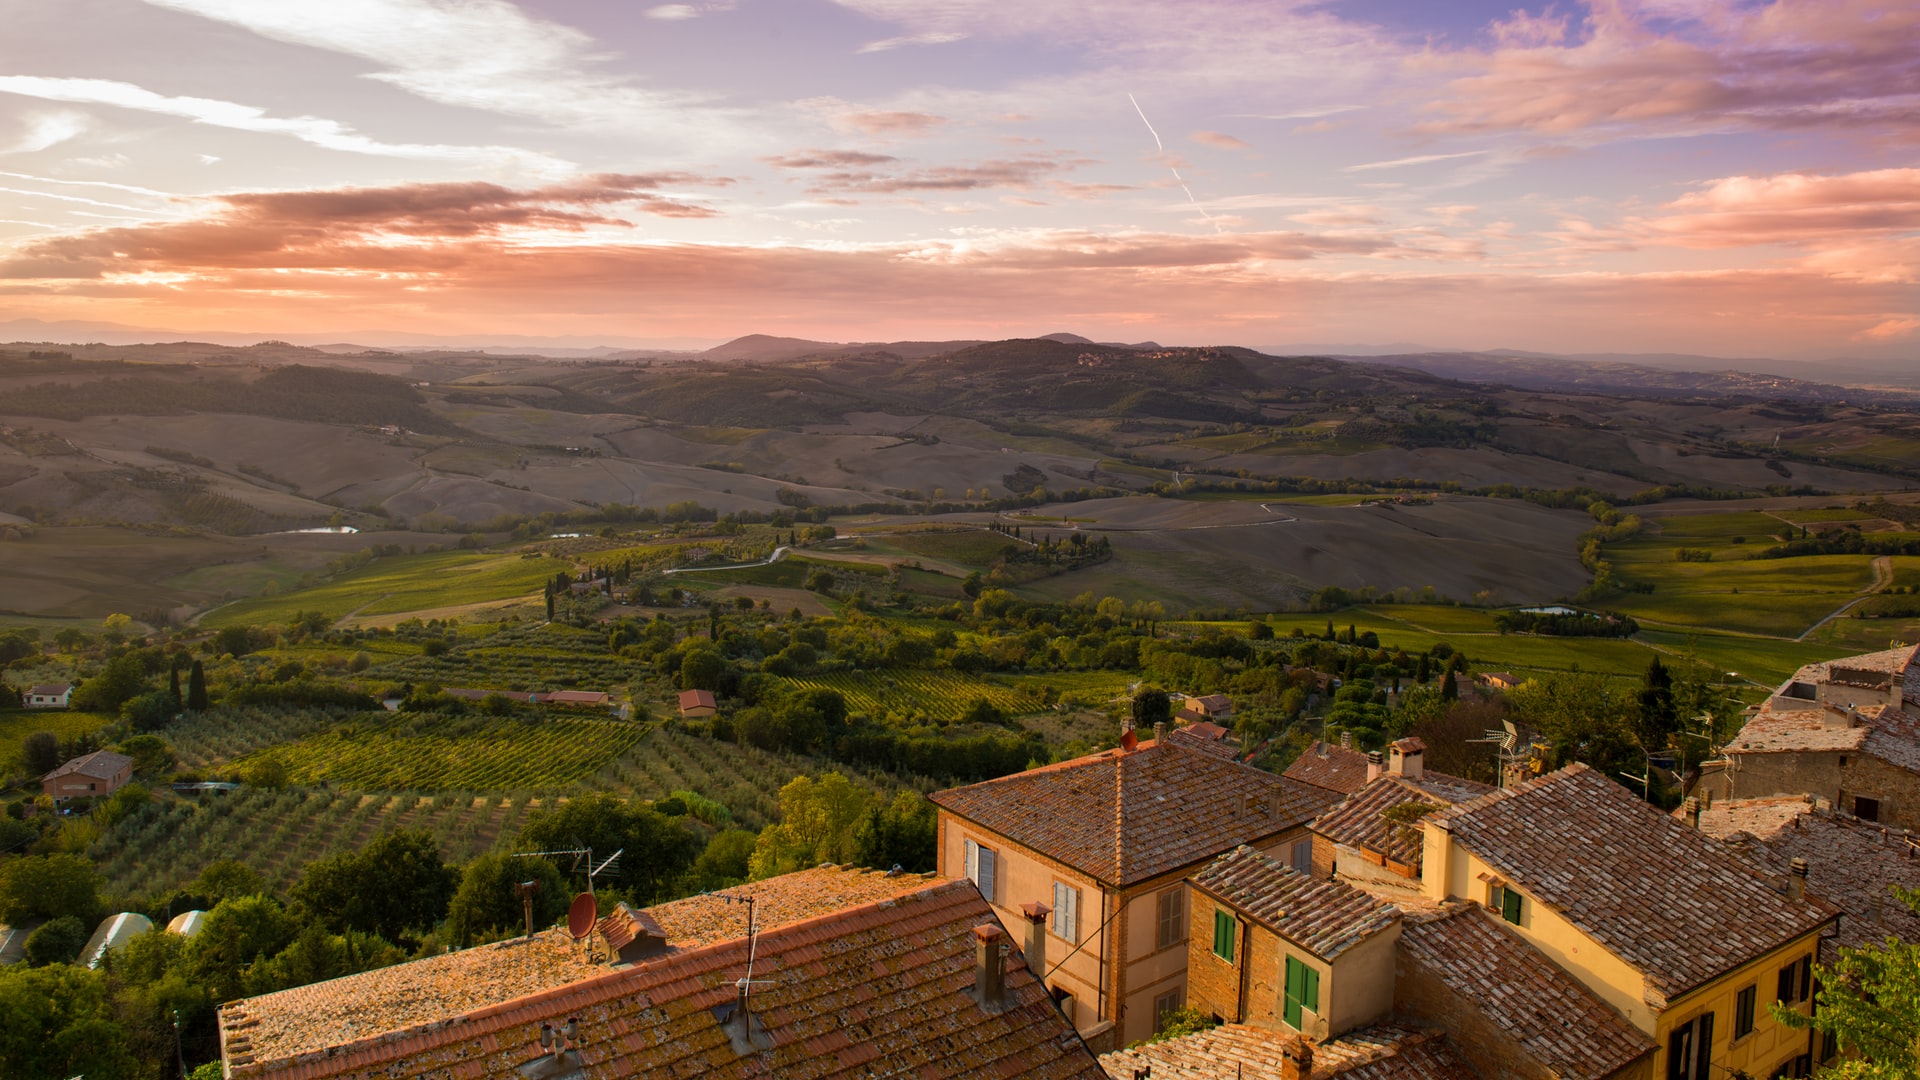 Tuscany Region is setting up a Crisis Management Team for Tourism